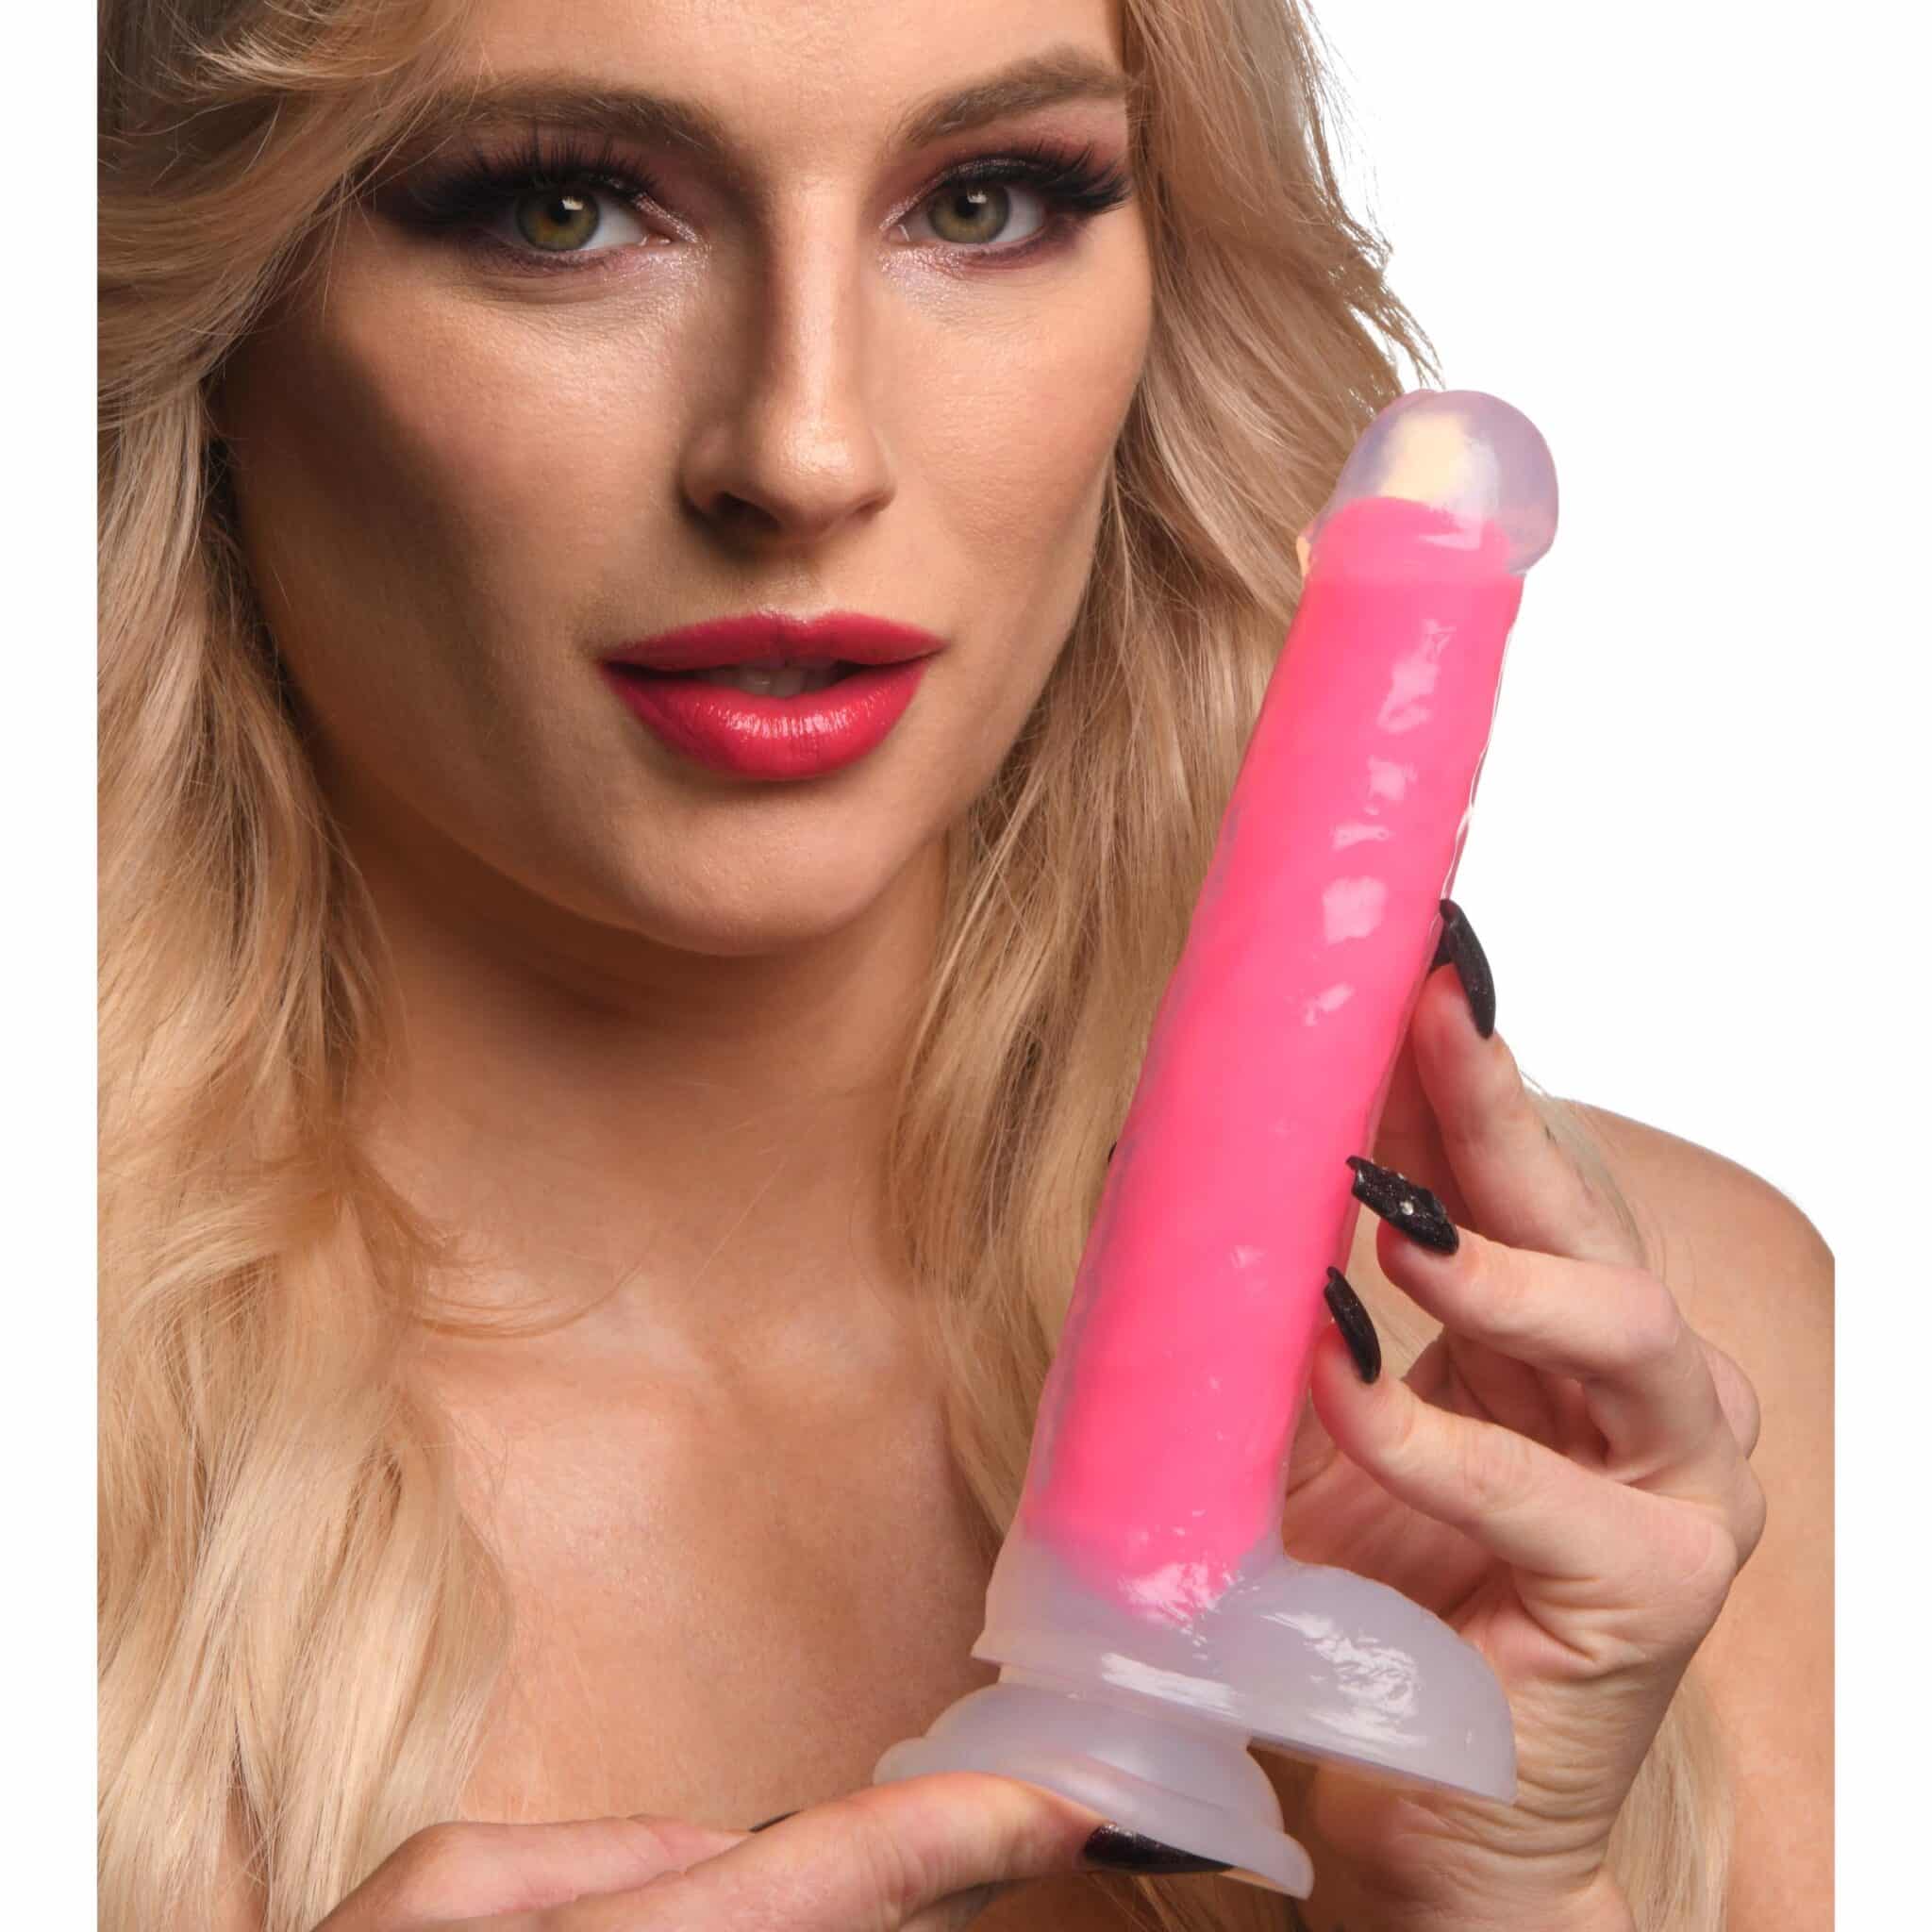 7 Inch Glow-in-the-Dark Silicone Dildo with Balls - Pink-4